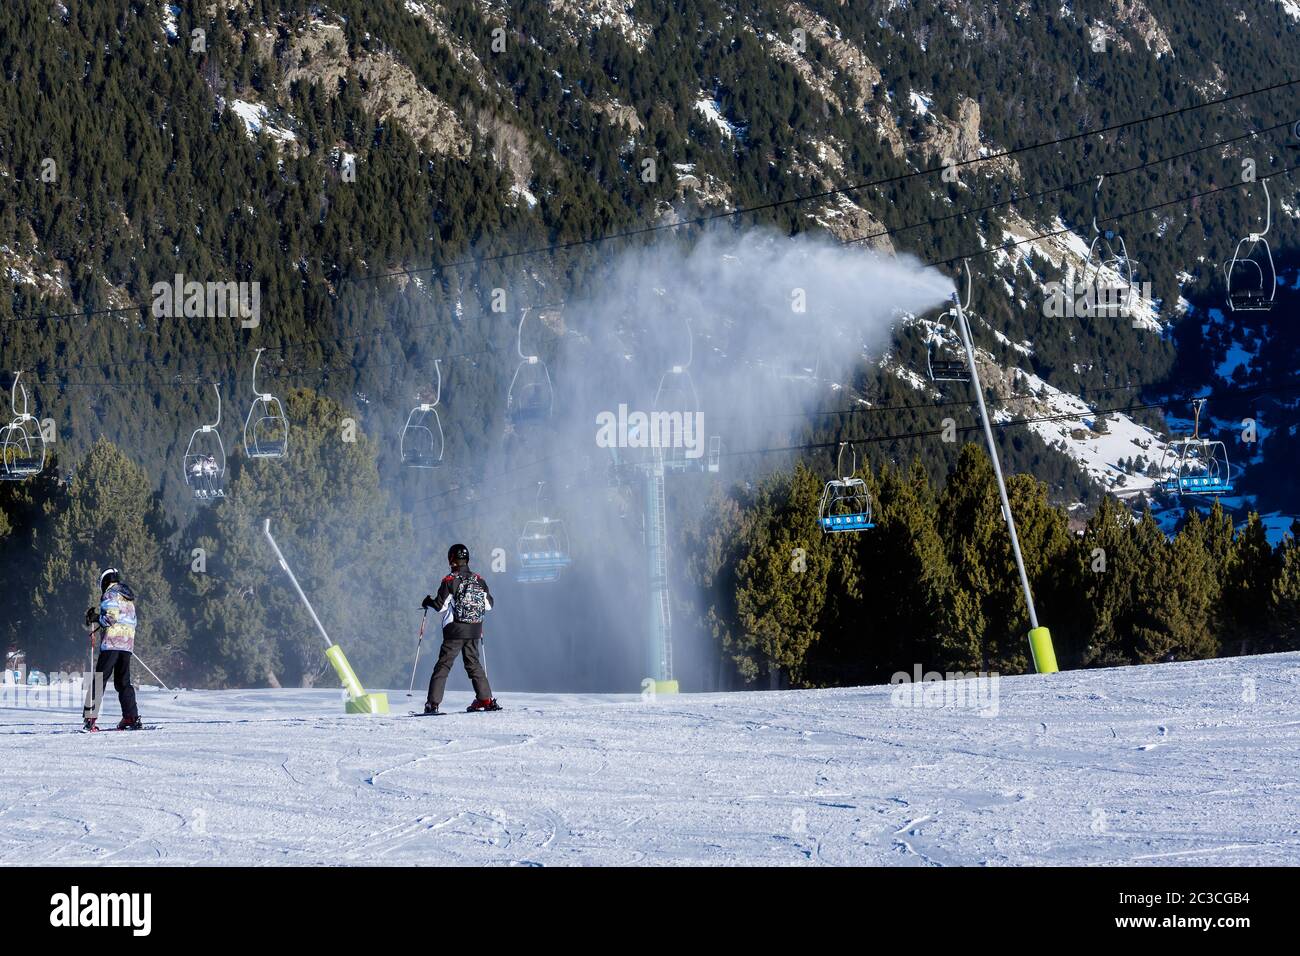 Snow canons blowing fresh snow on ski slope. Skiers on slopes with chairlifts and Pyrenees mountains Stock Photo